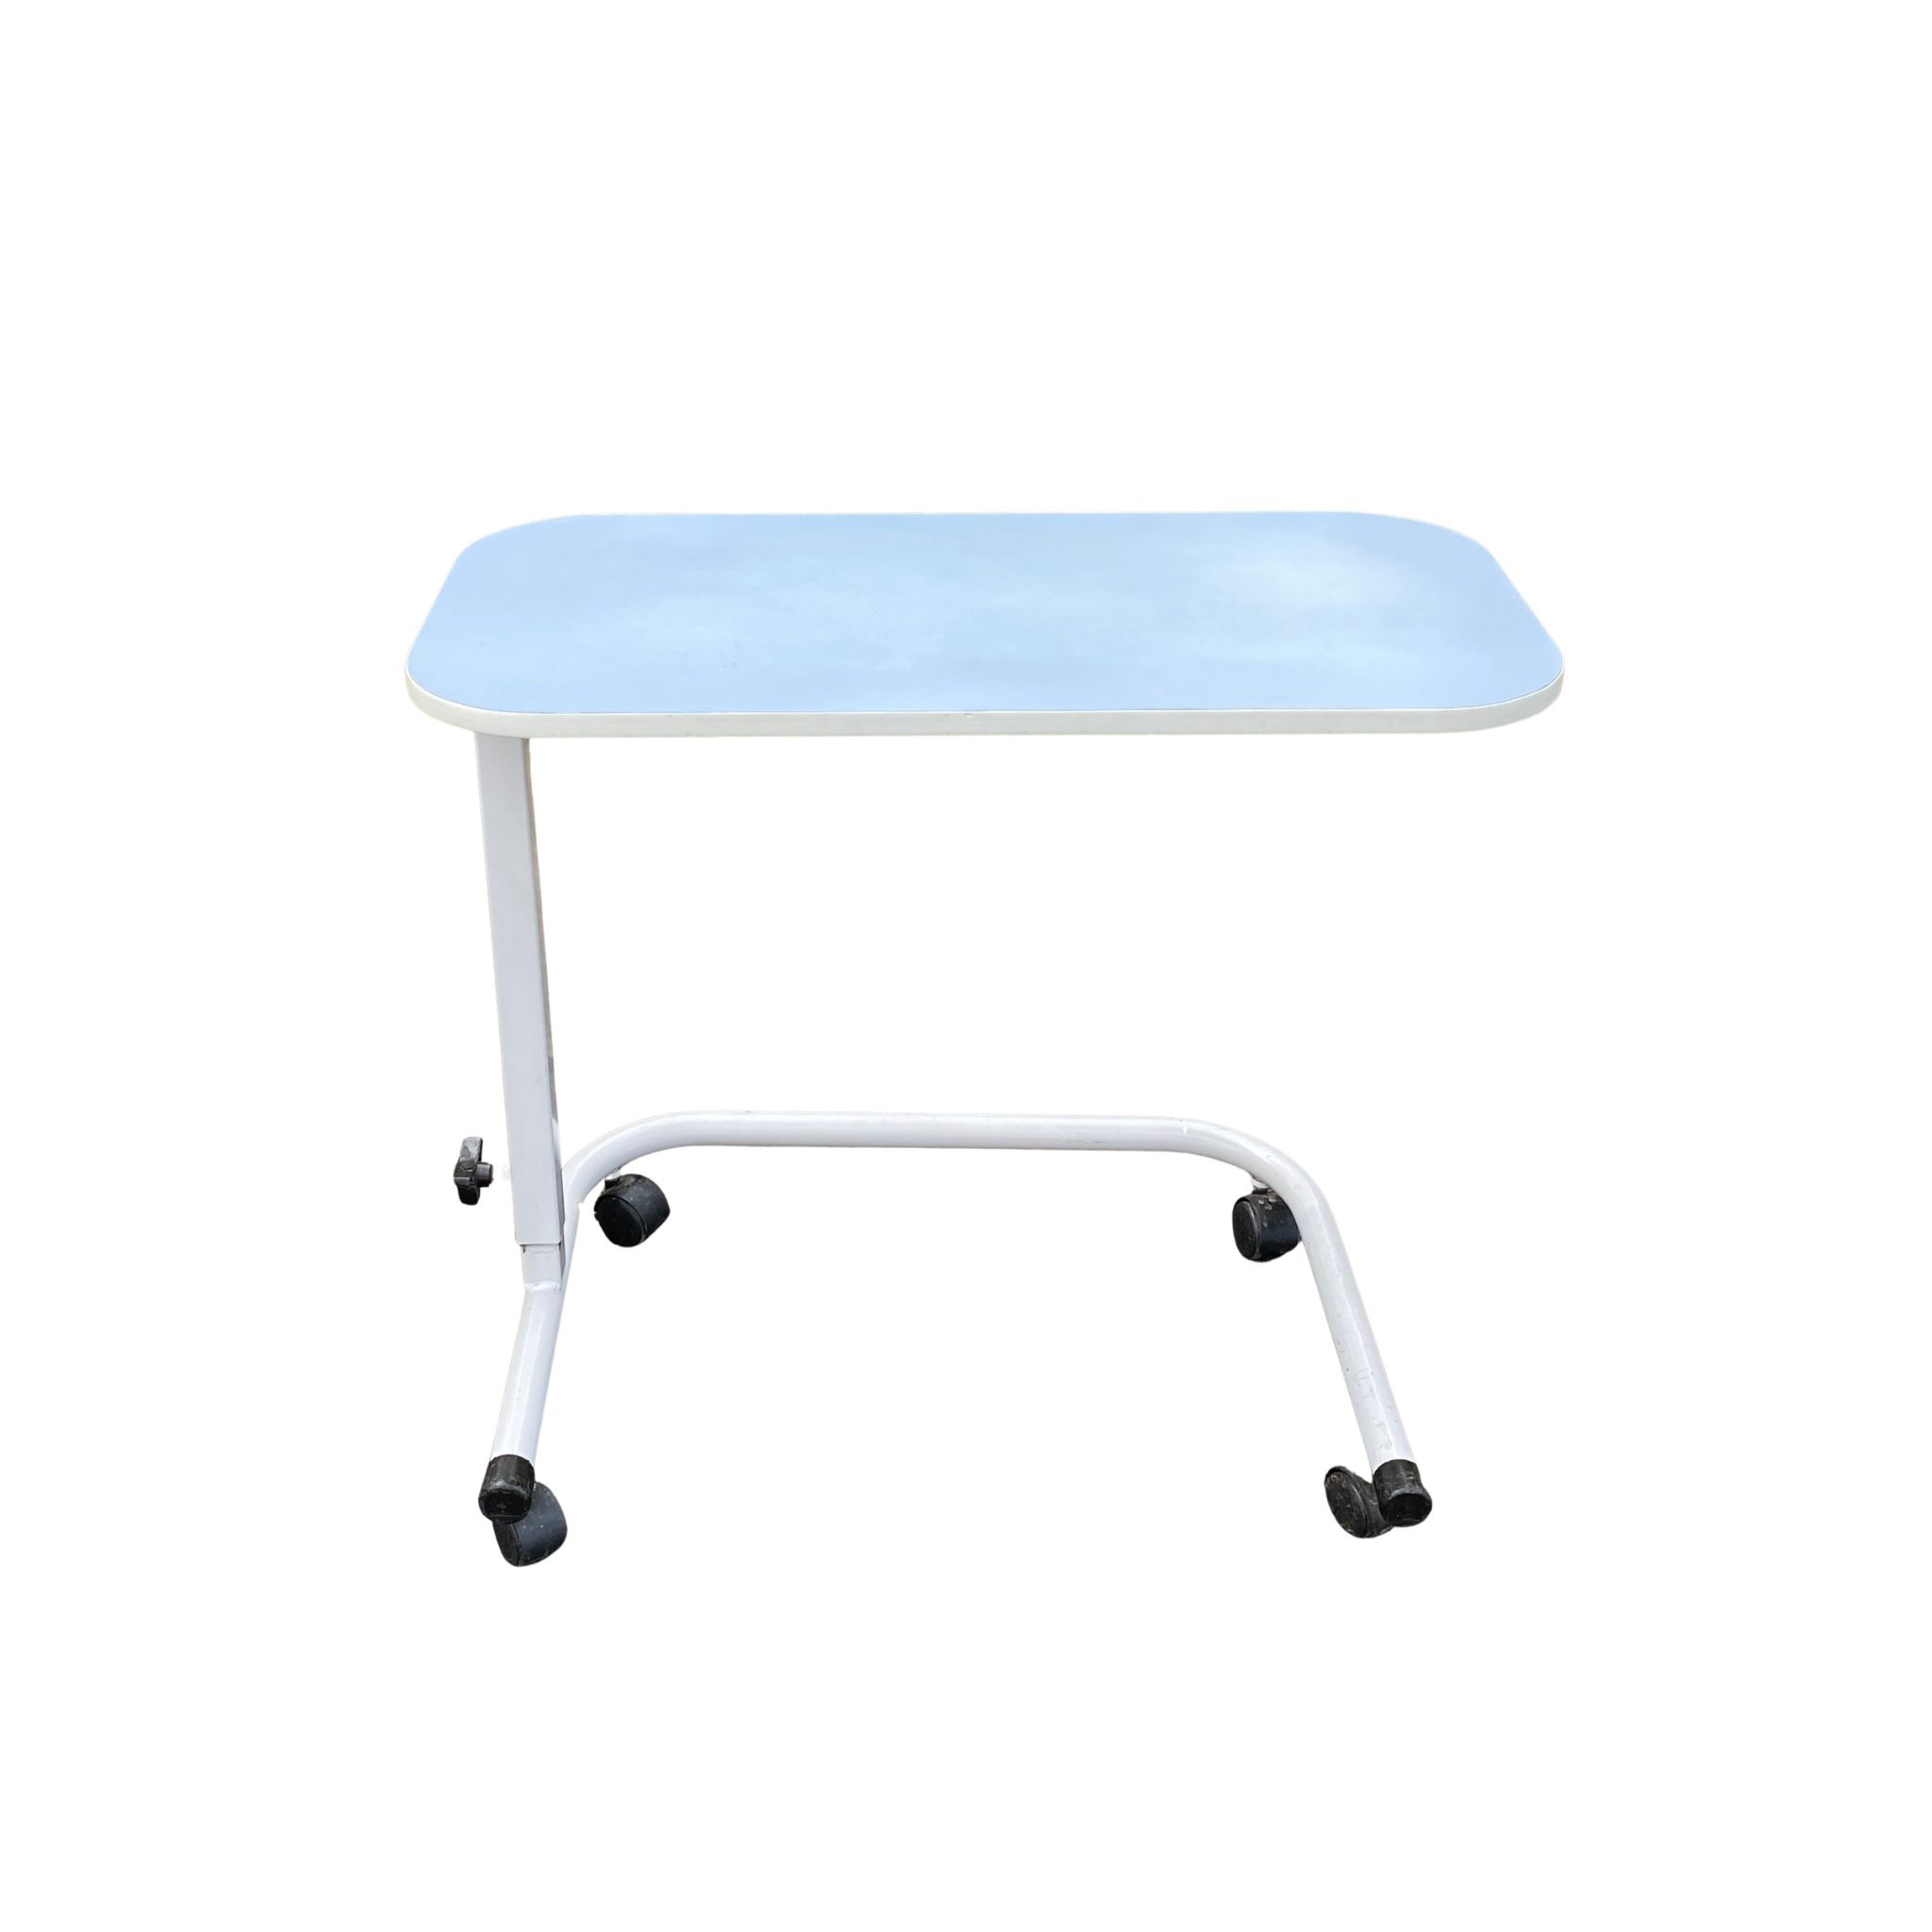 Rental - Over Bed/Chair Table from Aged Care and Medical - Over bed table for Hire / Over Chair table for hire for aged care